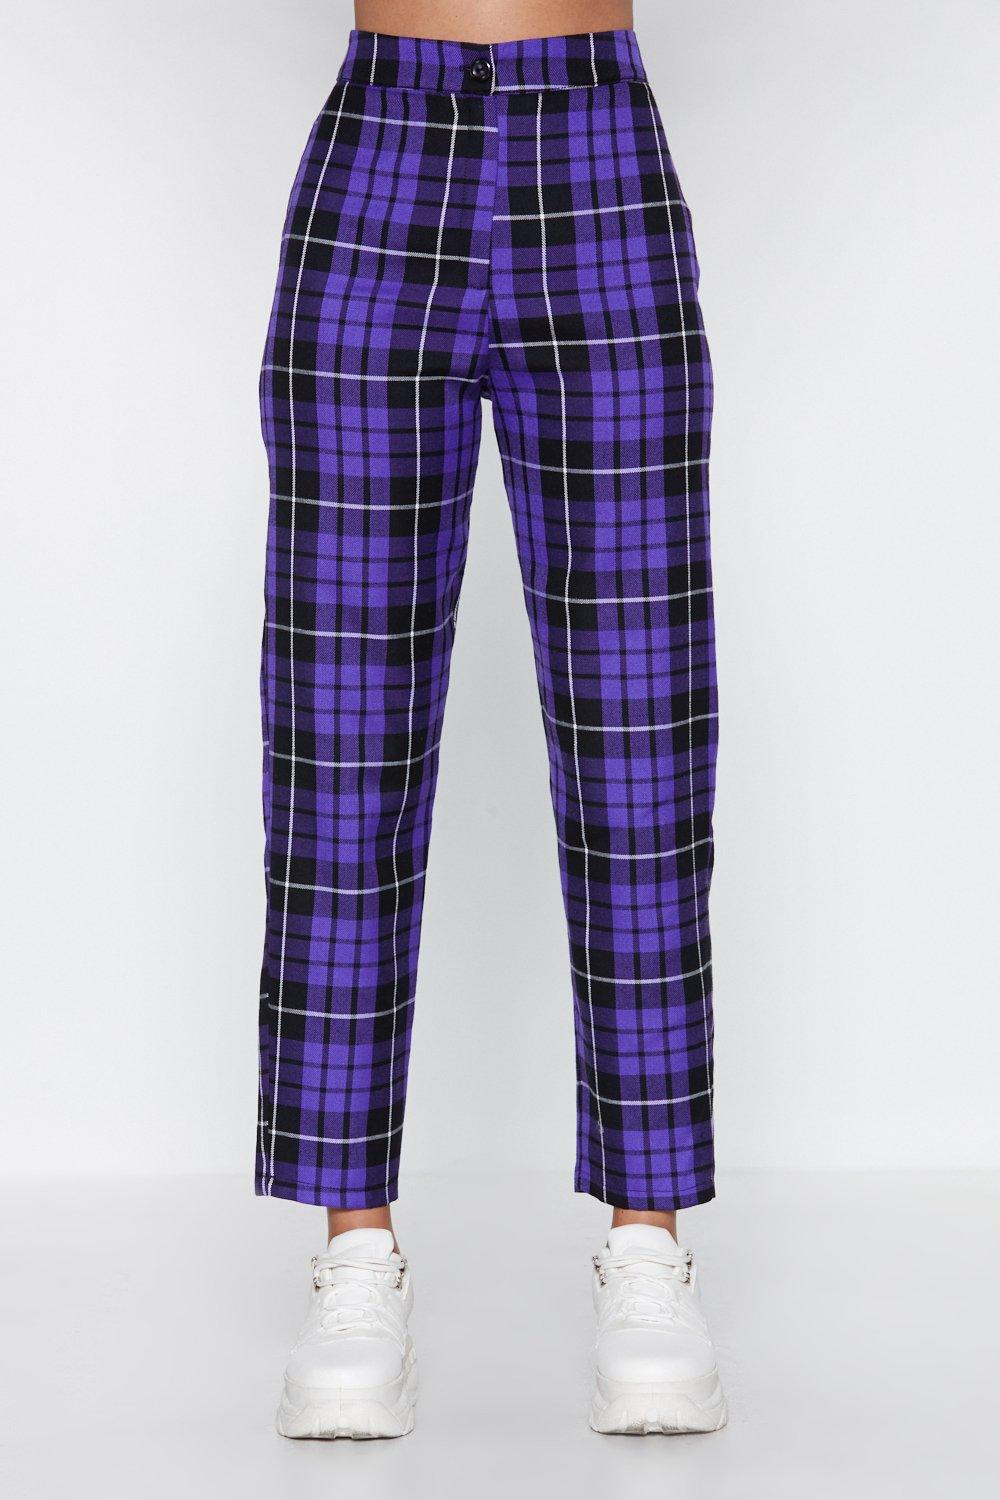 stores that sell plaid pants